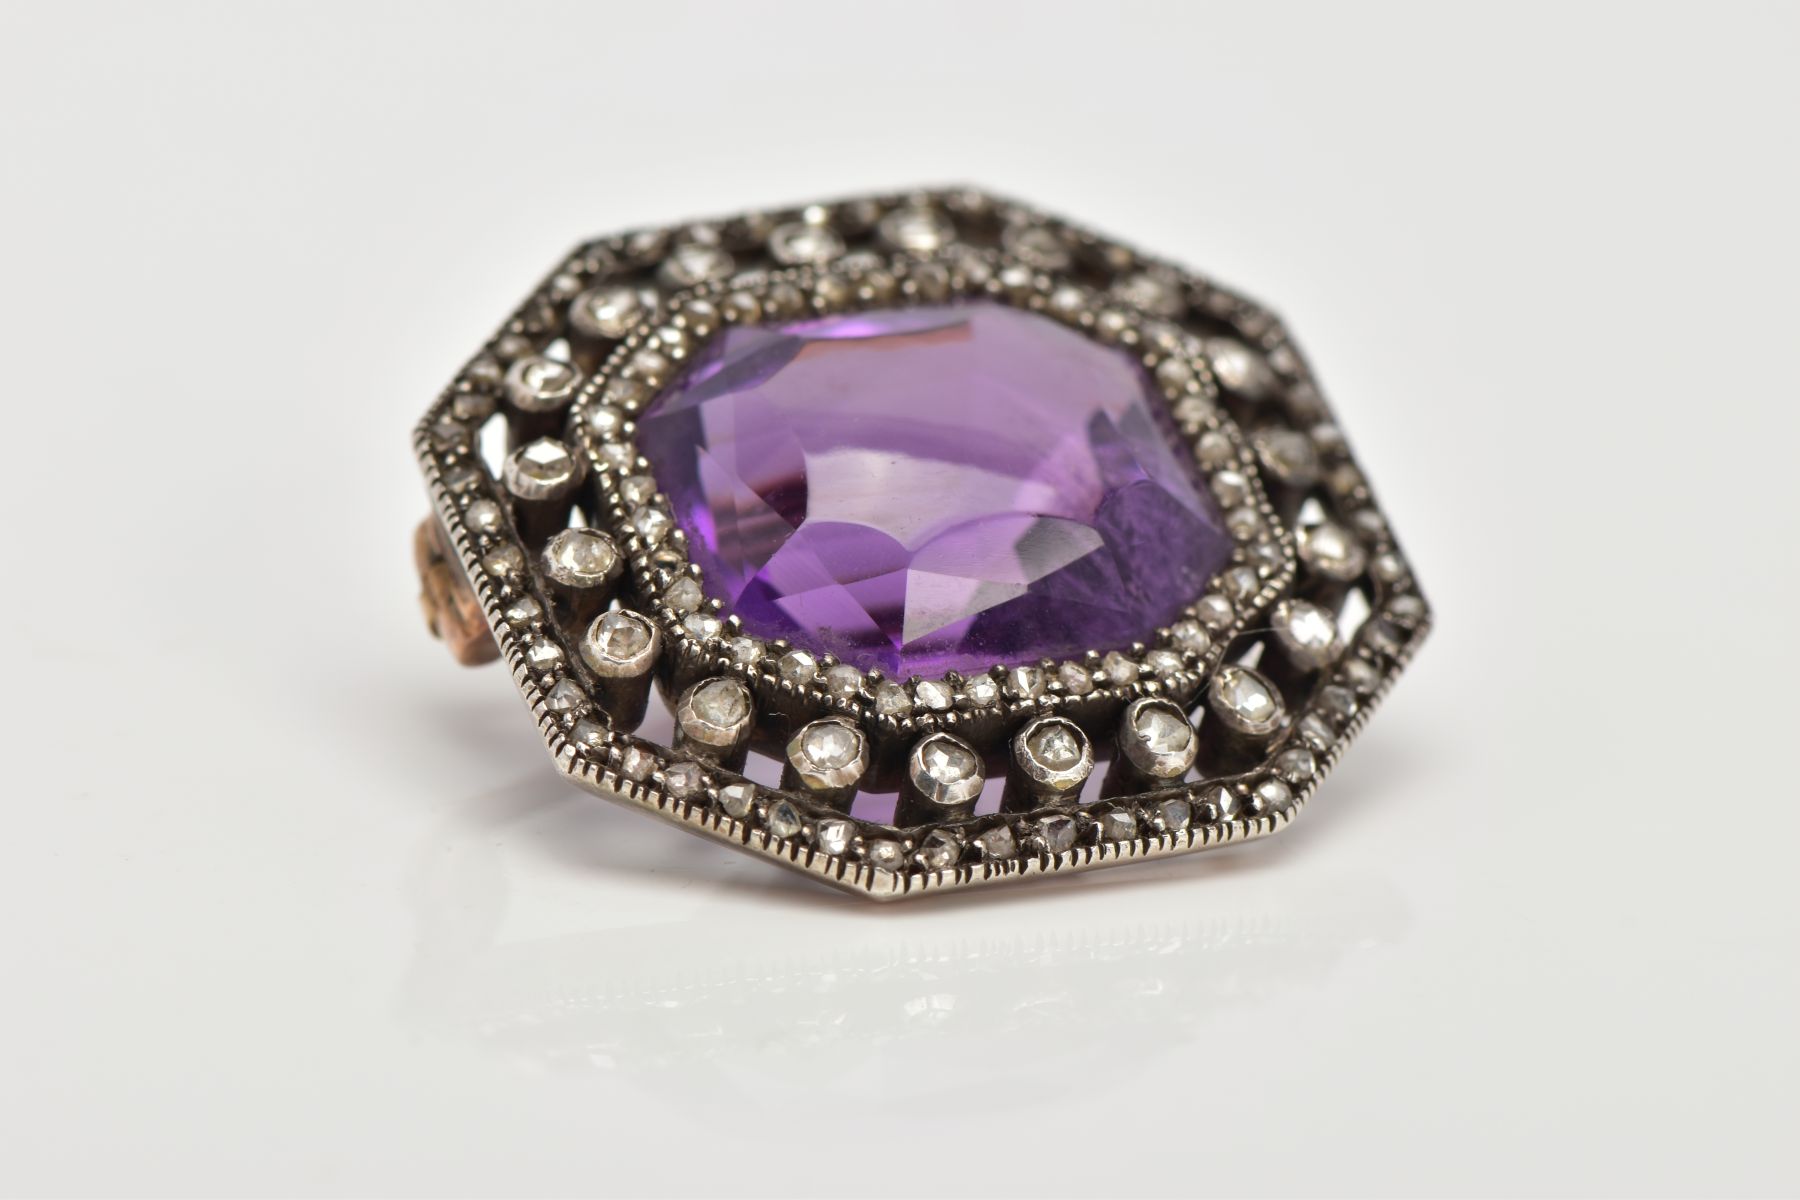 A LATE VICTORIAN AMETHYST AND ROSE CUT DIAMOND BROOCH, centring on a cushion cut amethyst, within an - Image 4 of 5